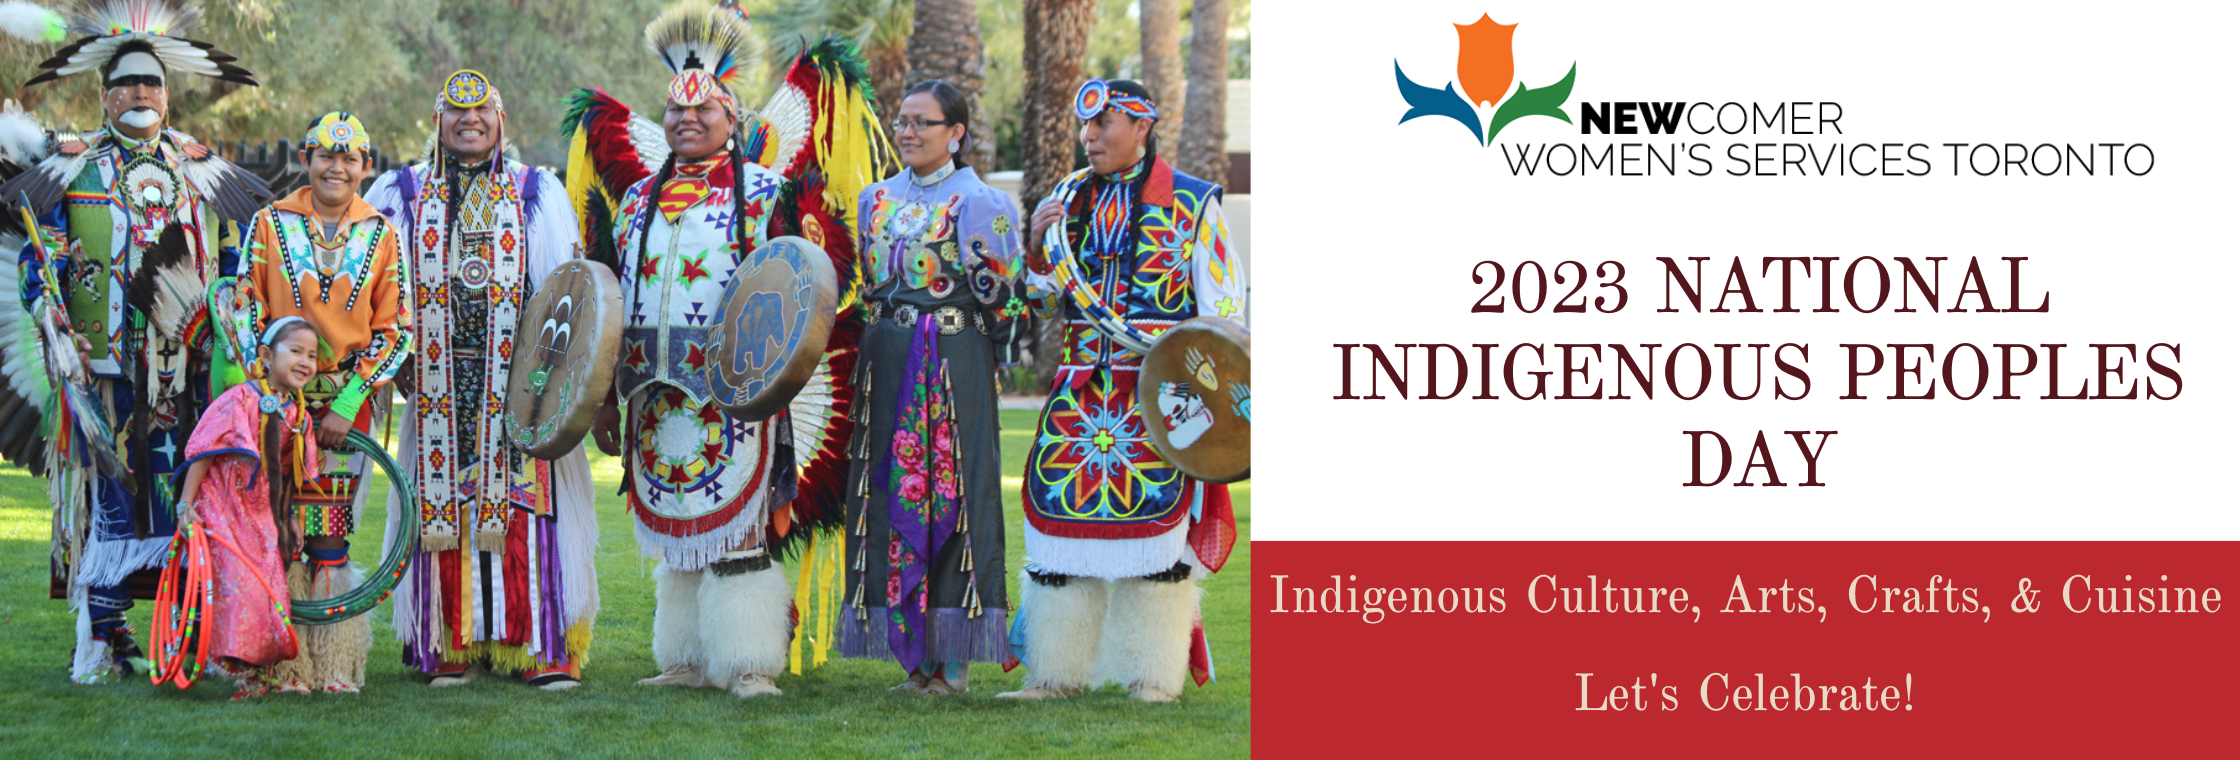 Indigenous People's Day Home Page Banner.png